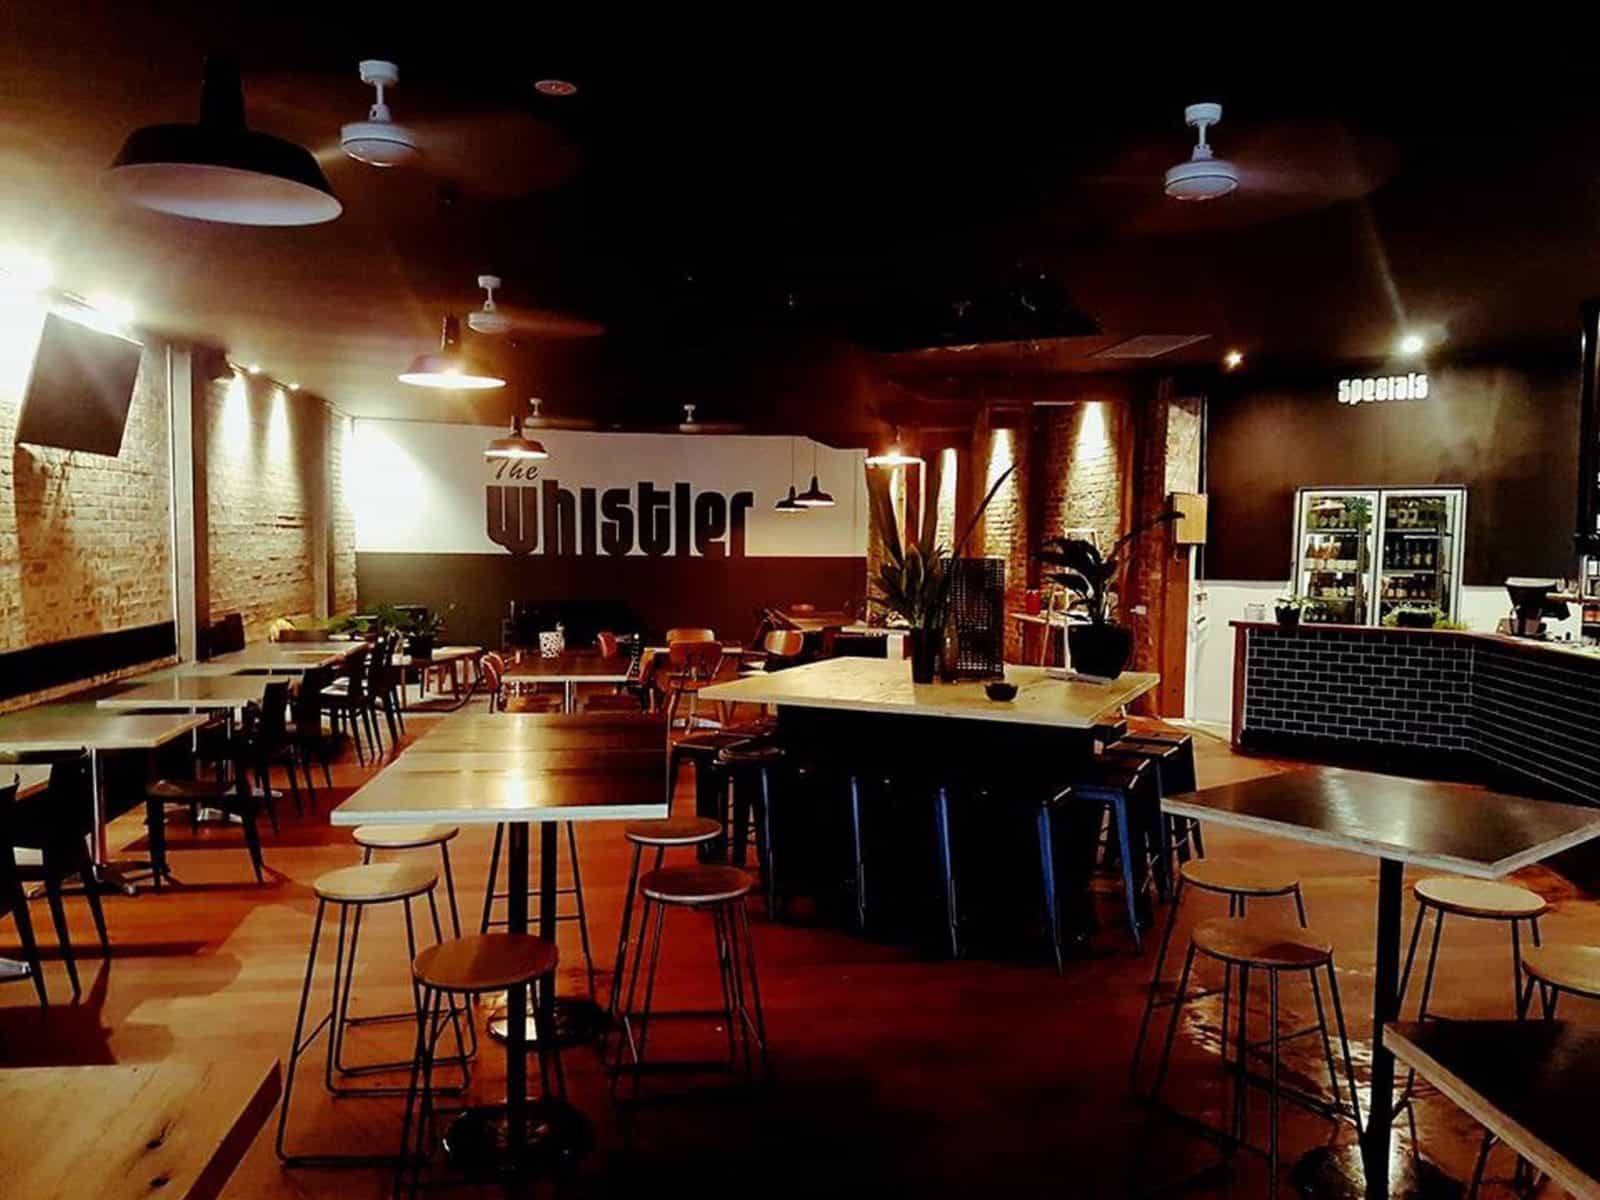 Interior photo of The Whistler bar and restaurant